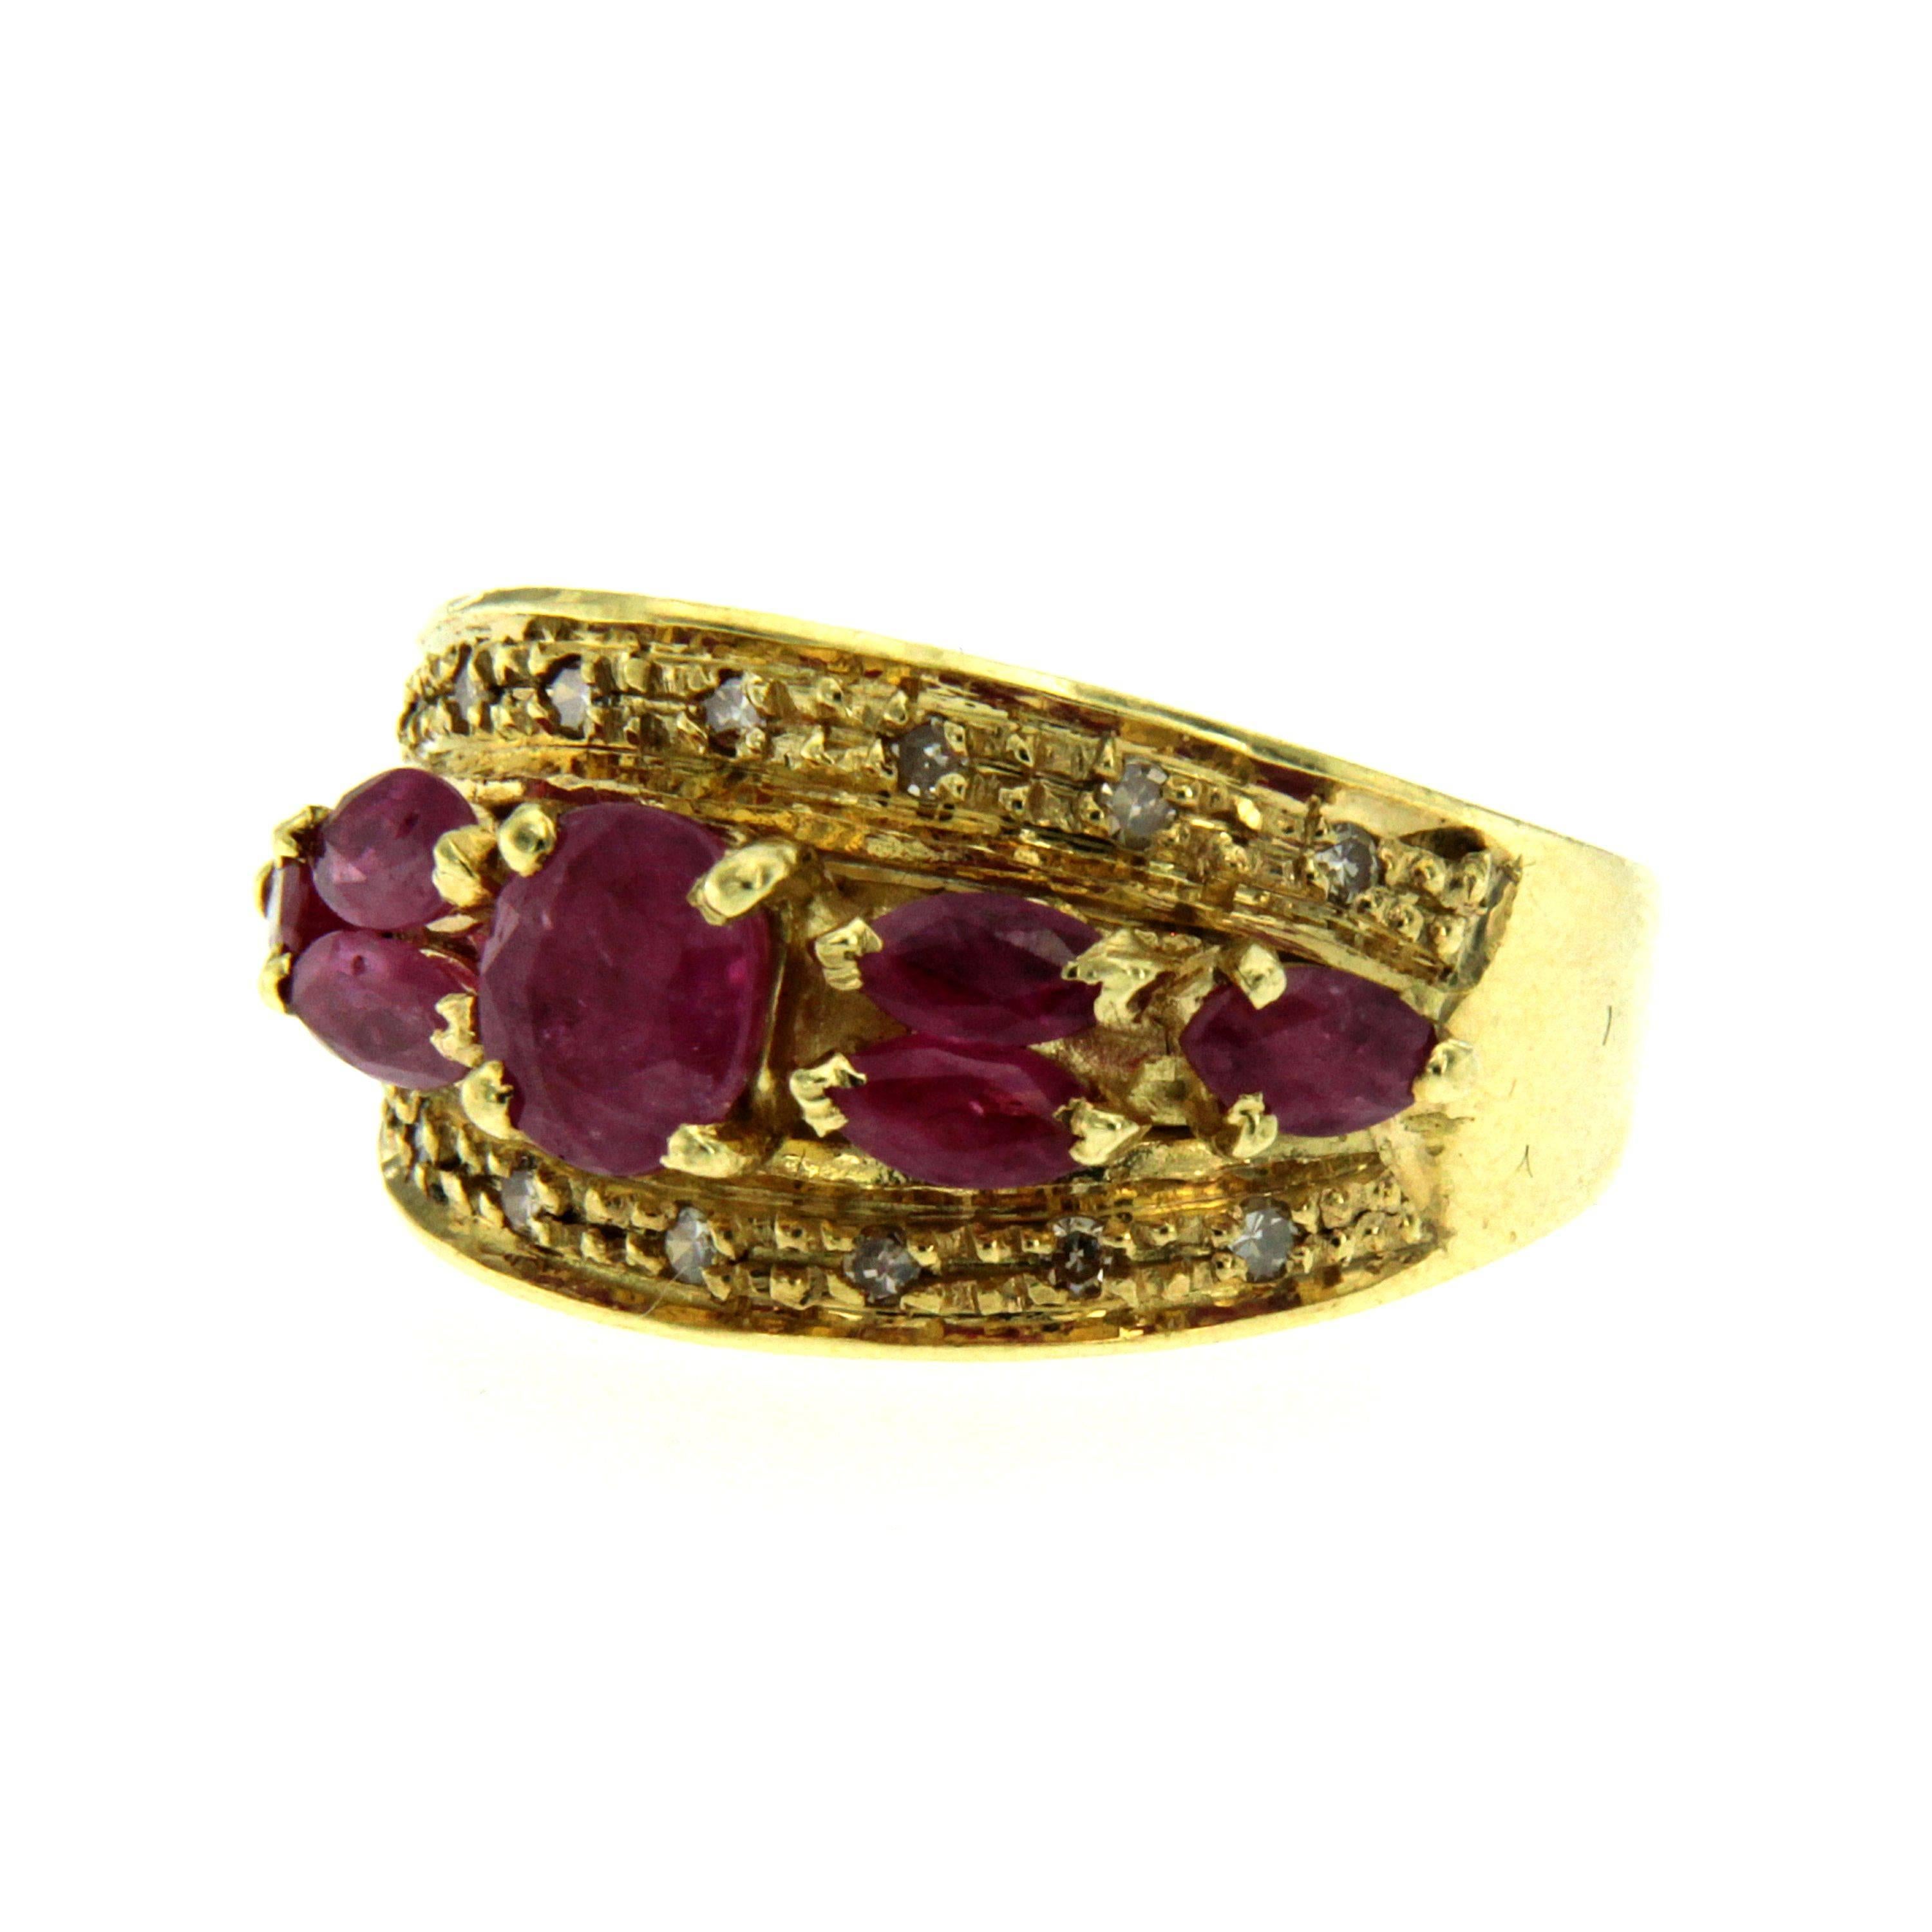 Gorgeous Retro ring handcrafted in 18k yellow gold set with 7 oval and marquise cut rubies weighing 1.00 carats accented by 14 small round brilliant cut diamonds 0.10 total carats. Circa 1950

CONDITION: Pre-owned - Excellent
METAL: 18k Gold
GEM